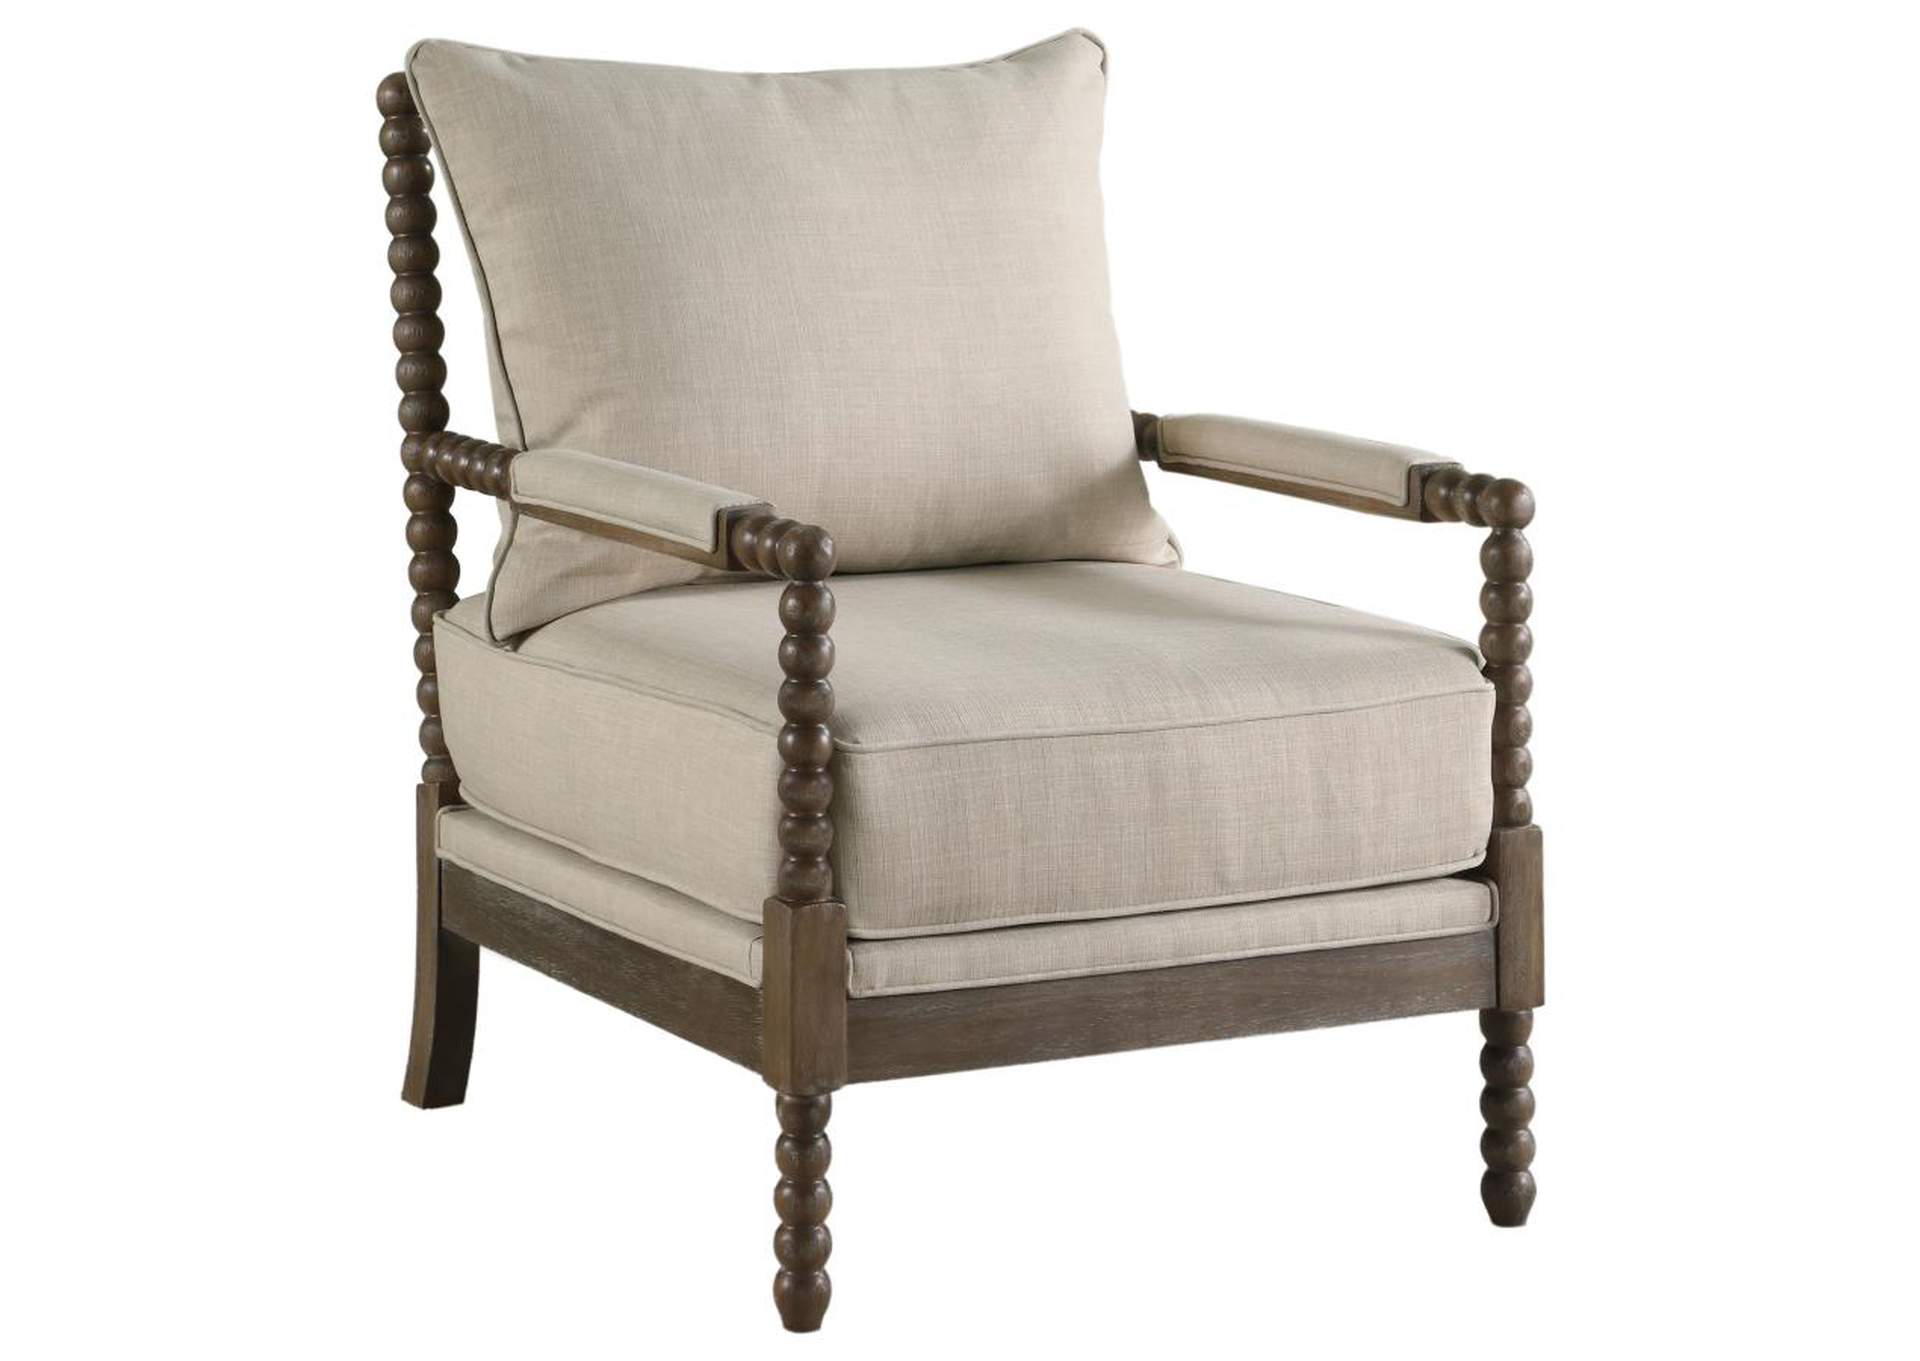 Blanchett Cushion Back Accent Chair Beige And Natural,Coaster Furniture